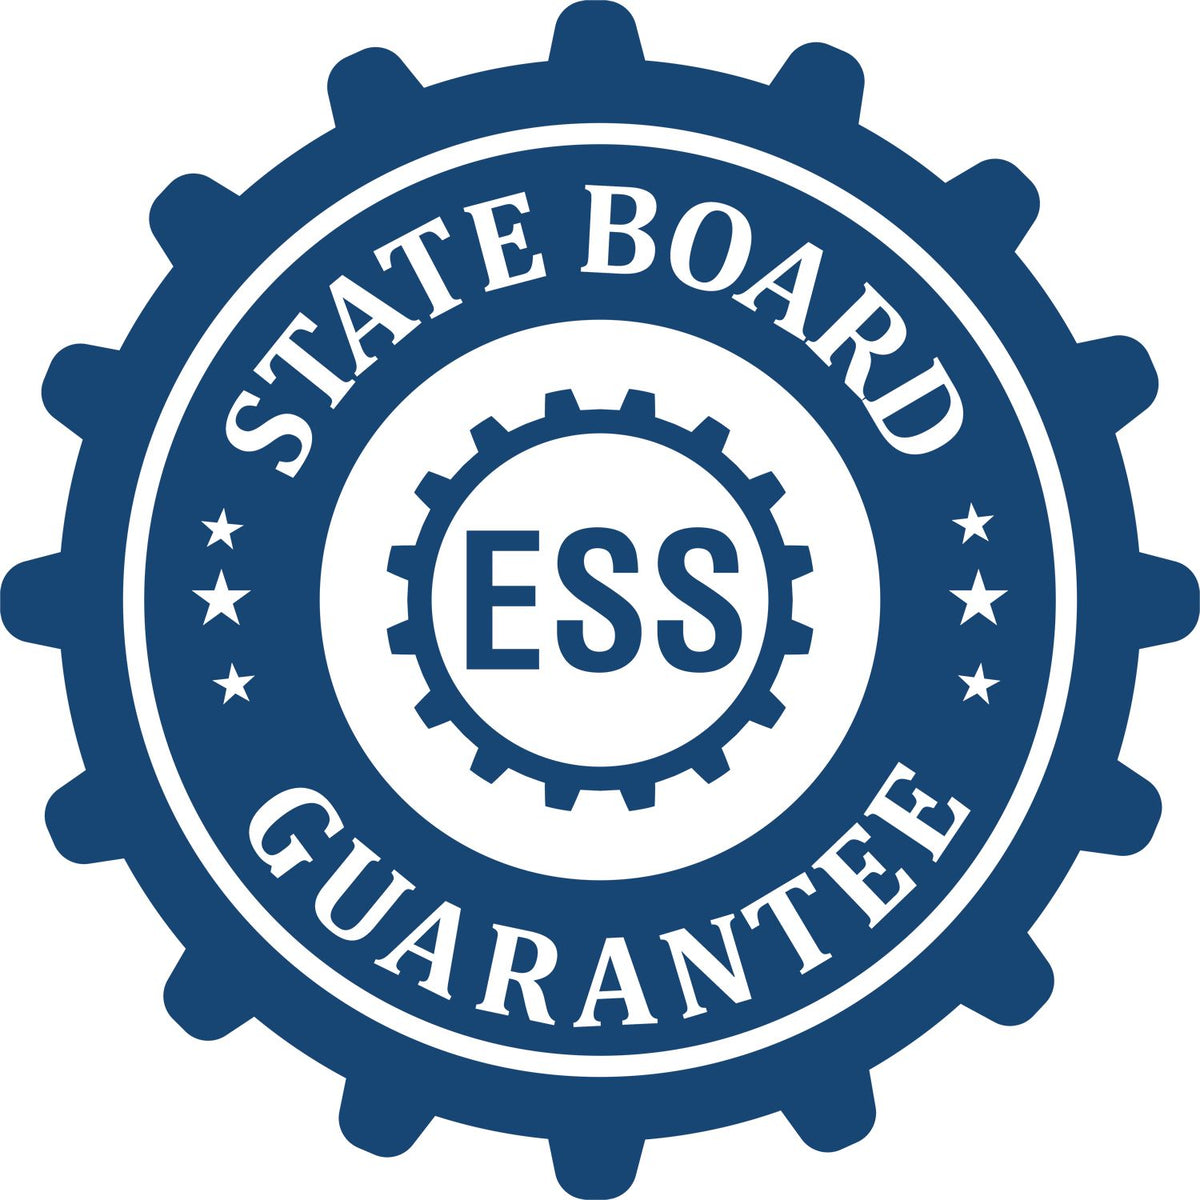 An emblem in a gear shape illustrating a state board guarantee for the Soft Florida Professional Engineer Seal product.